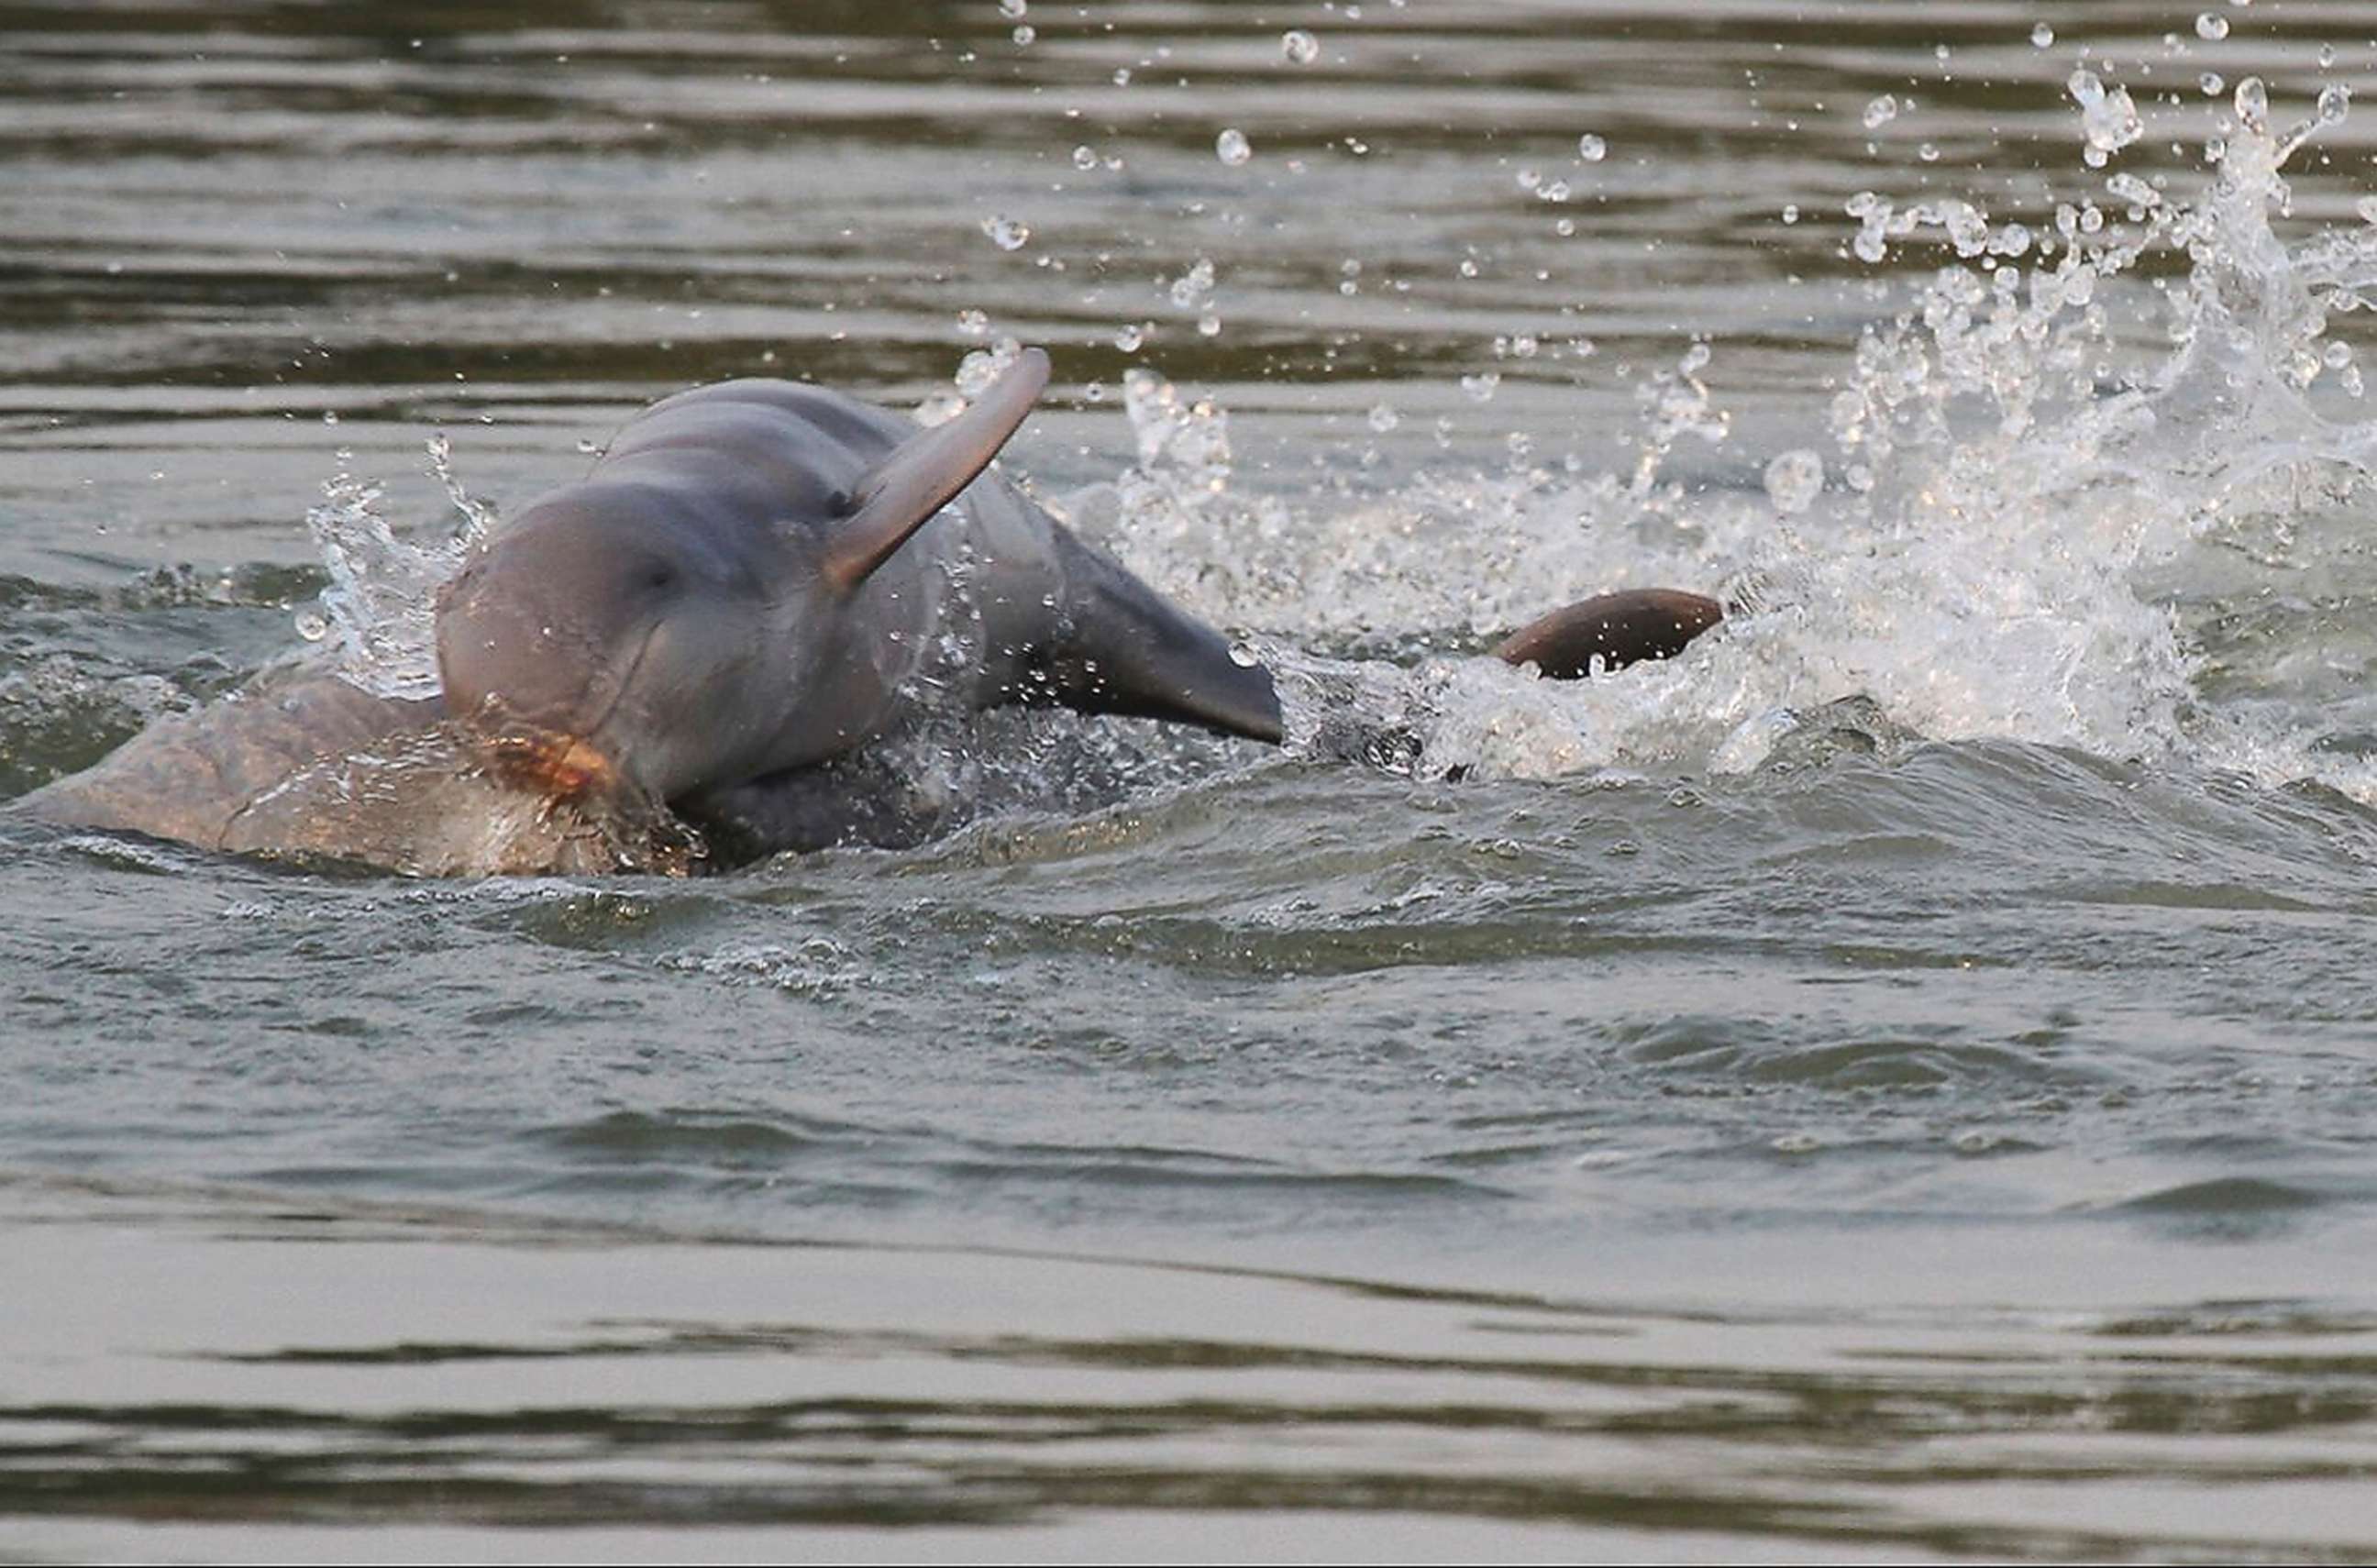 PHOTO: River dolphins in the Mekong river near Kratie province in the northeastern of Phnom Penh, Cambodia. The number of critically endangered Irrawaddy dolphins along a stretch of the Mekong River has increased for the first time in 20 years.